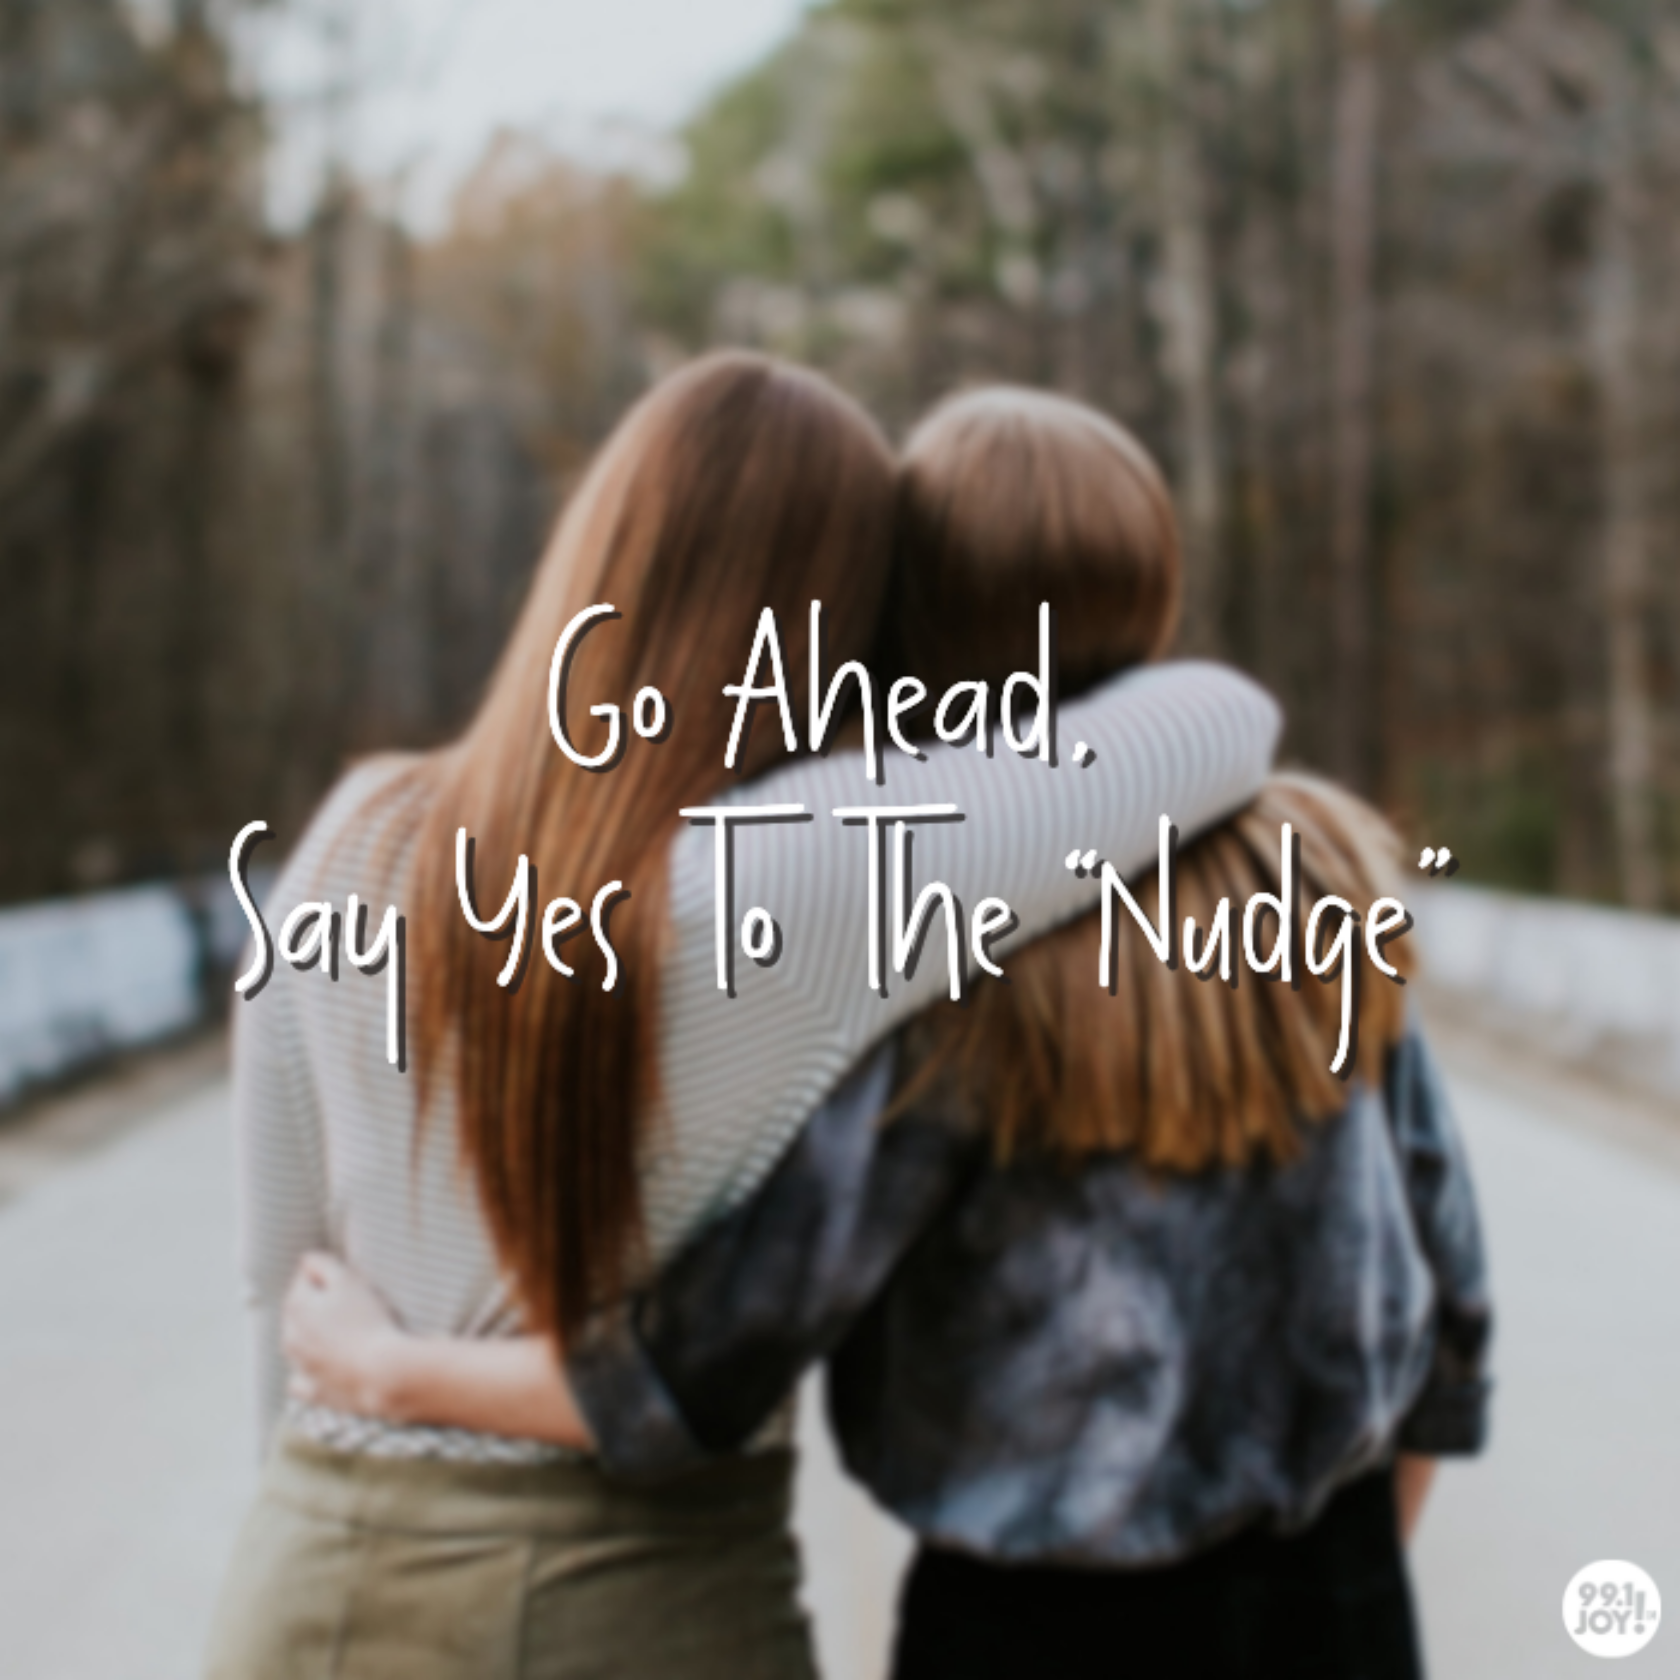 Go Ahead, Say Yes To The “Nudge”